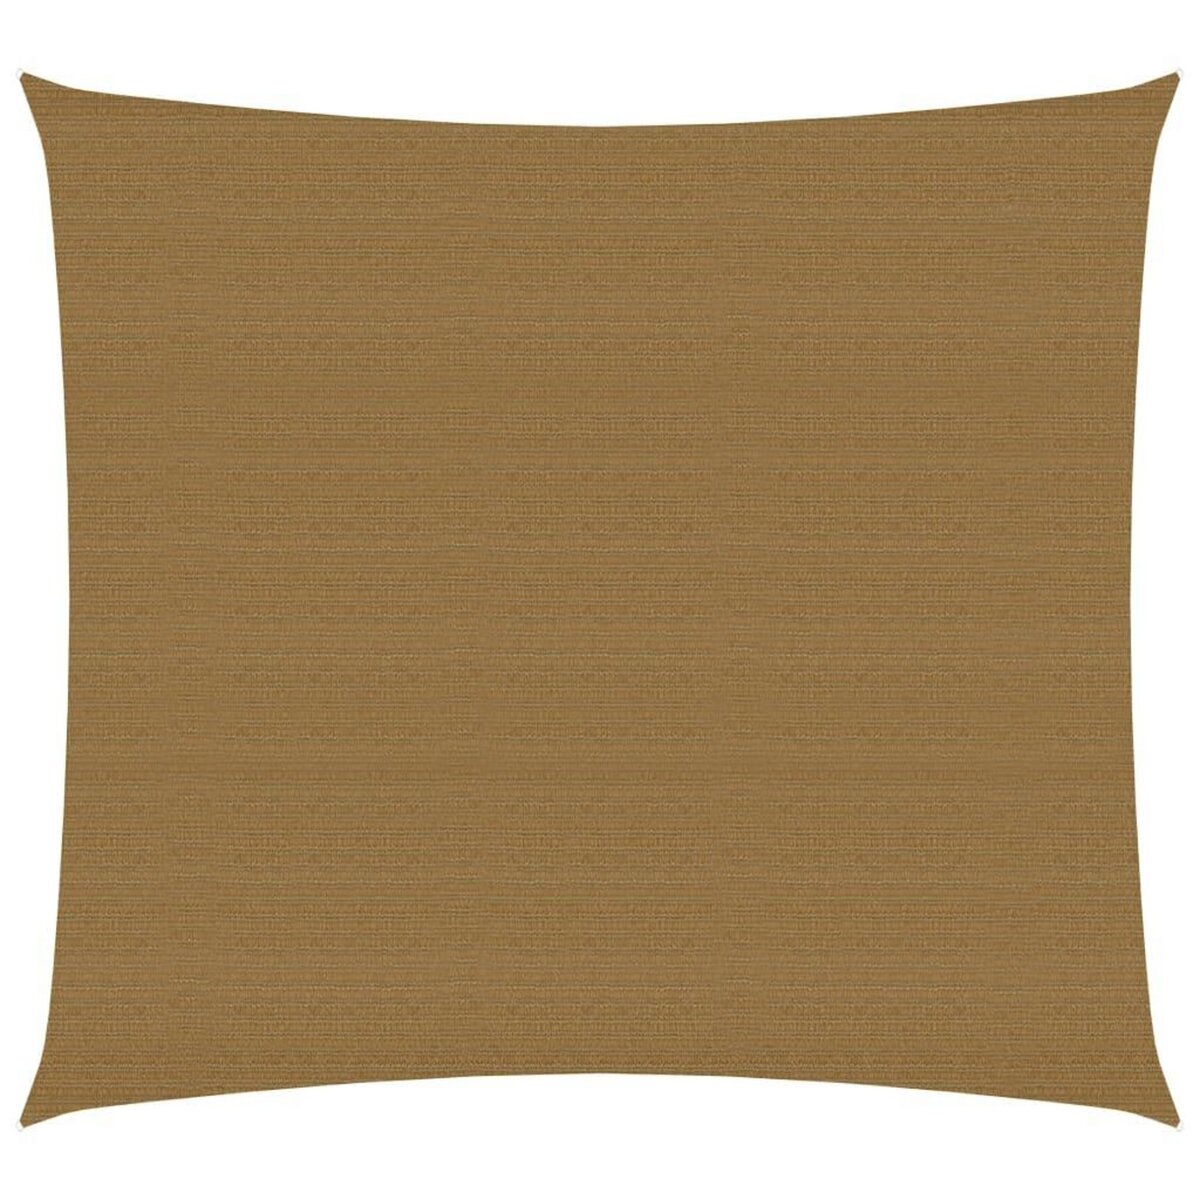 VIDAXL Voile d'ombrage 160 g/m^2 Taupe 2x2 m PEHD